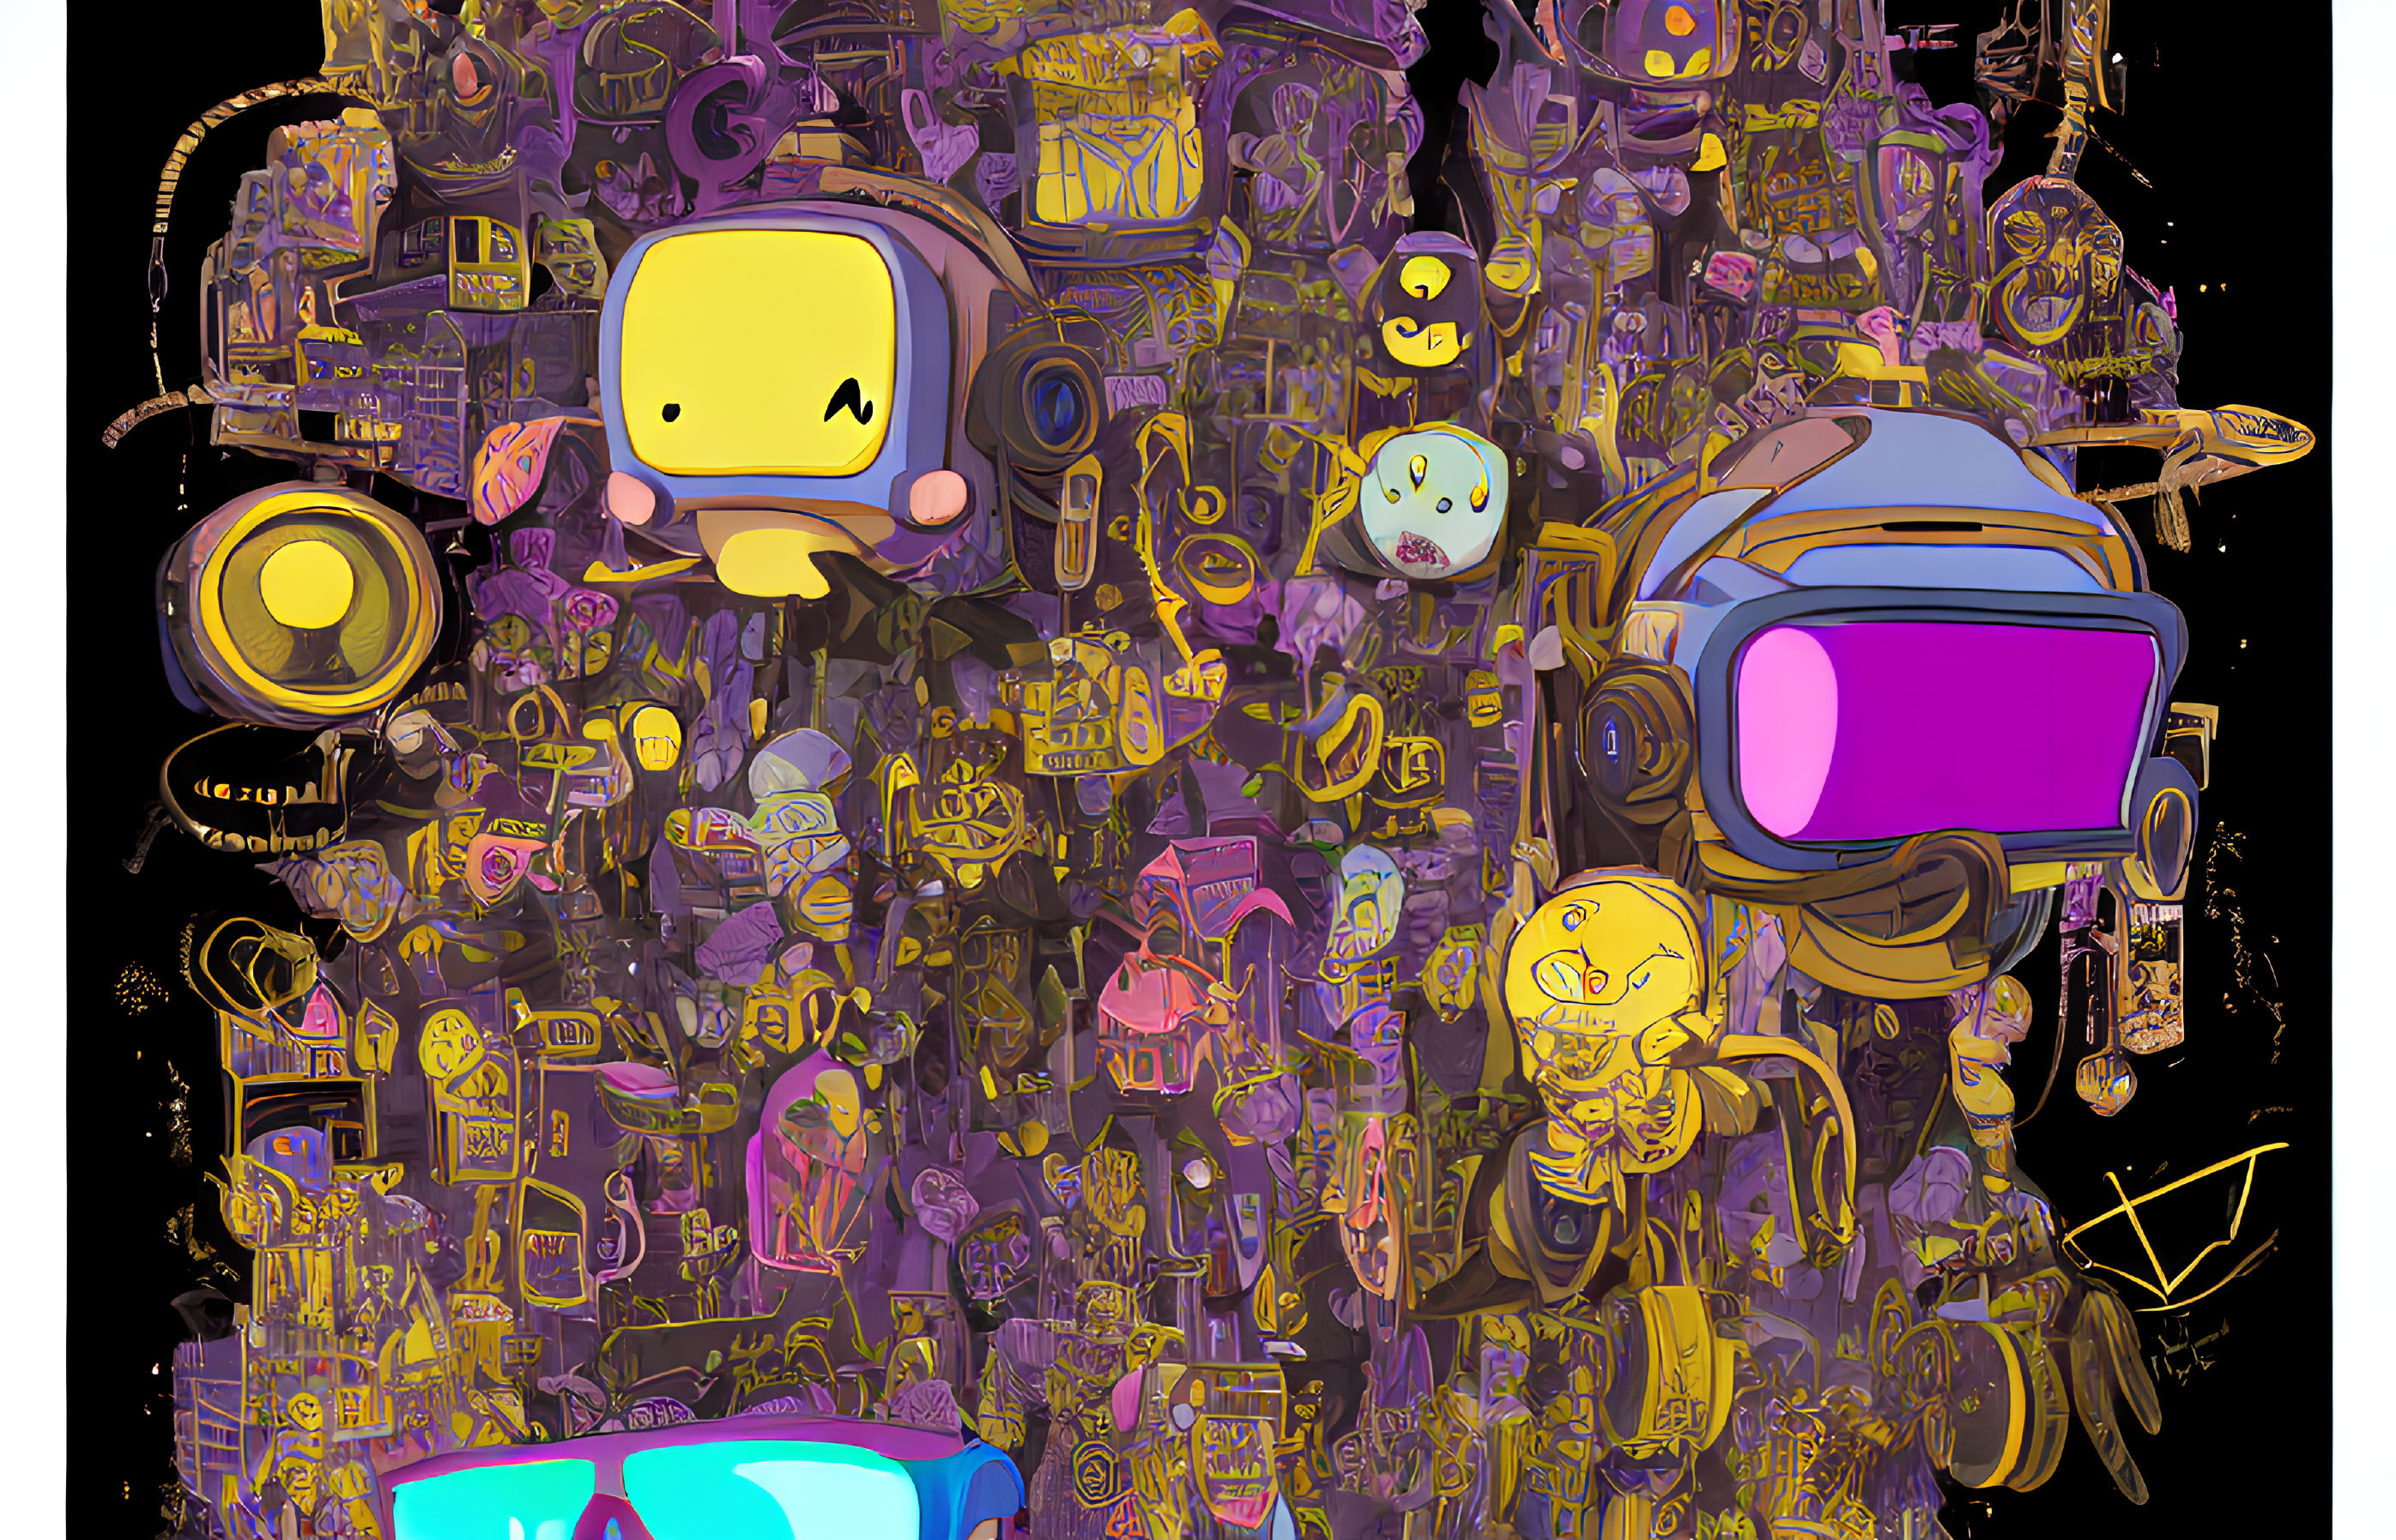 Colorful Stylized Robots and Characters on Dark Background